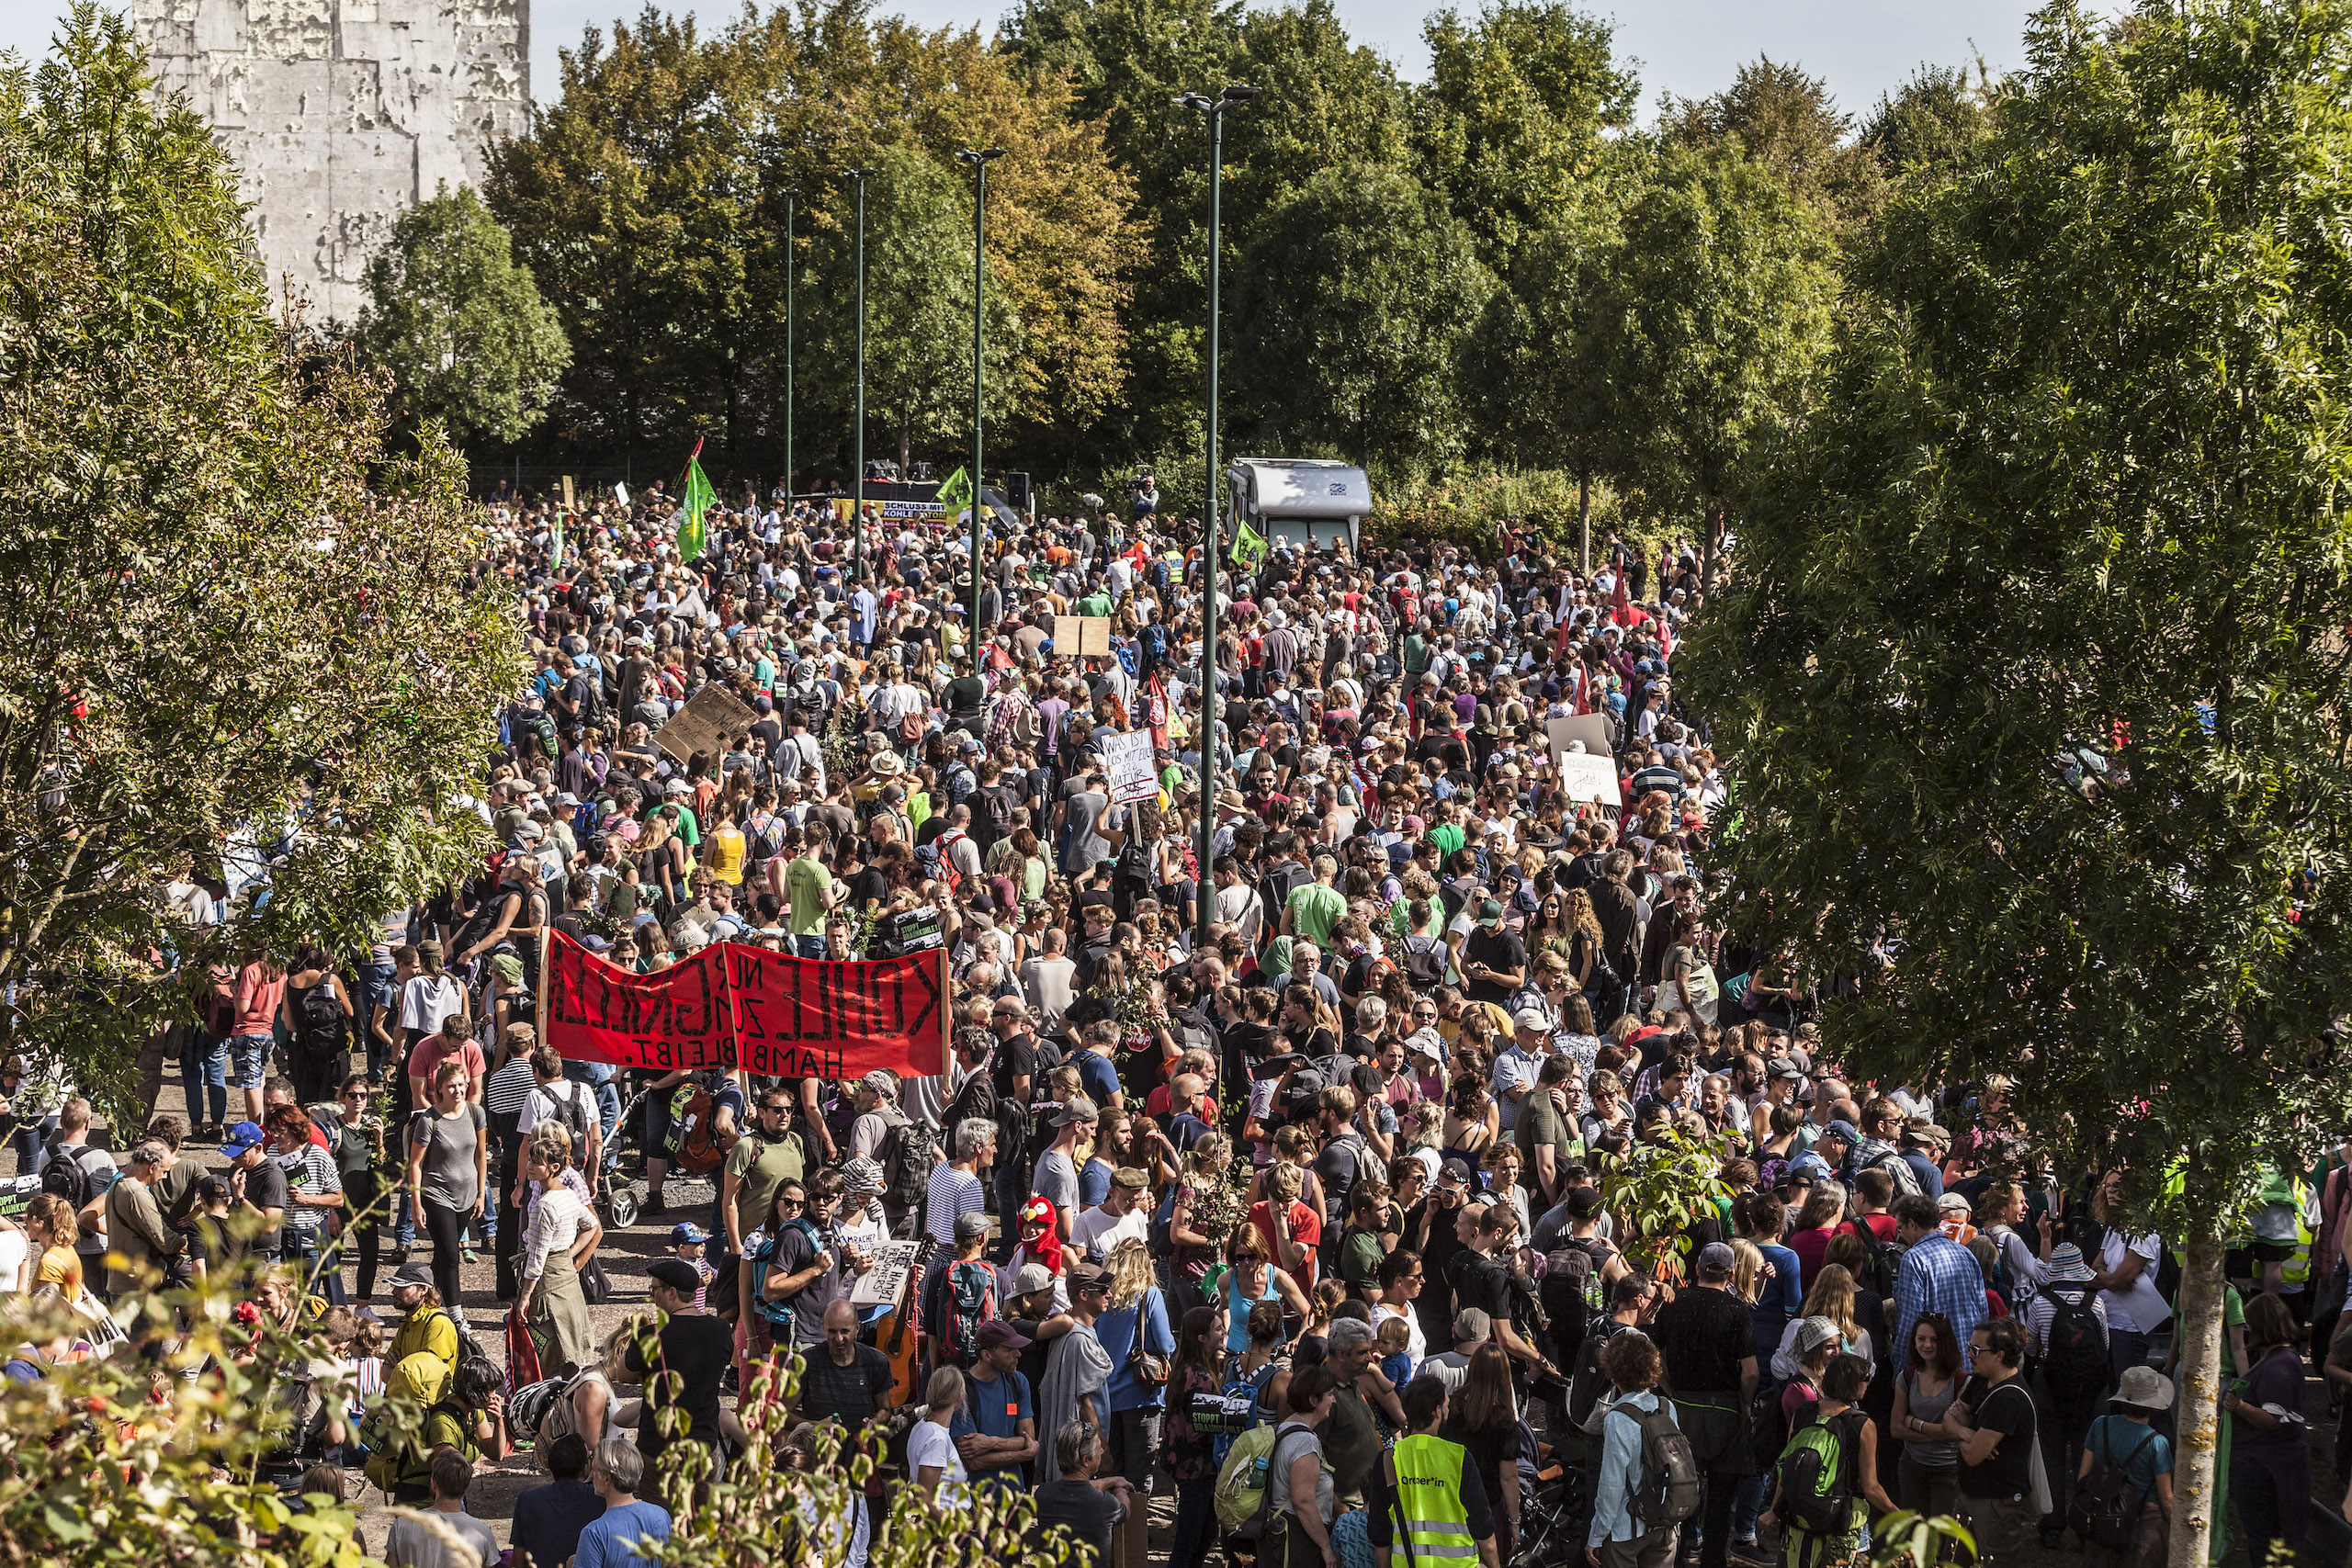 Demonstration to protest against RWE´s plans for logging in Hambach Forest for coal mining. The phase out of coal is a major issue in the 2021 German election